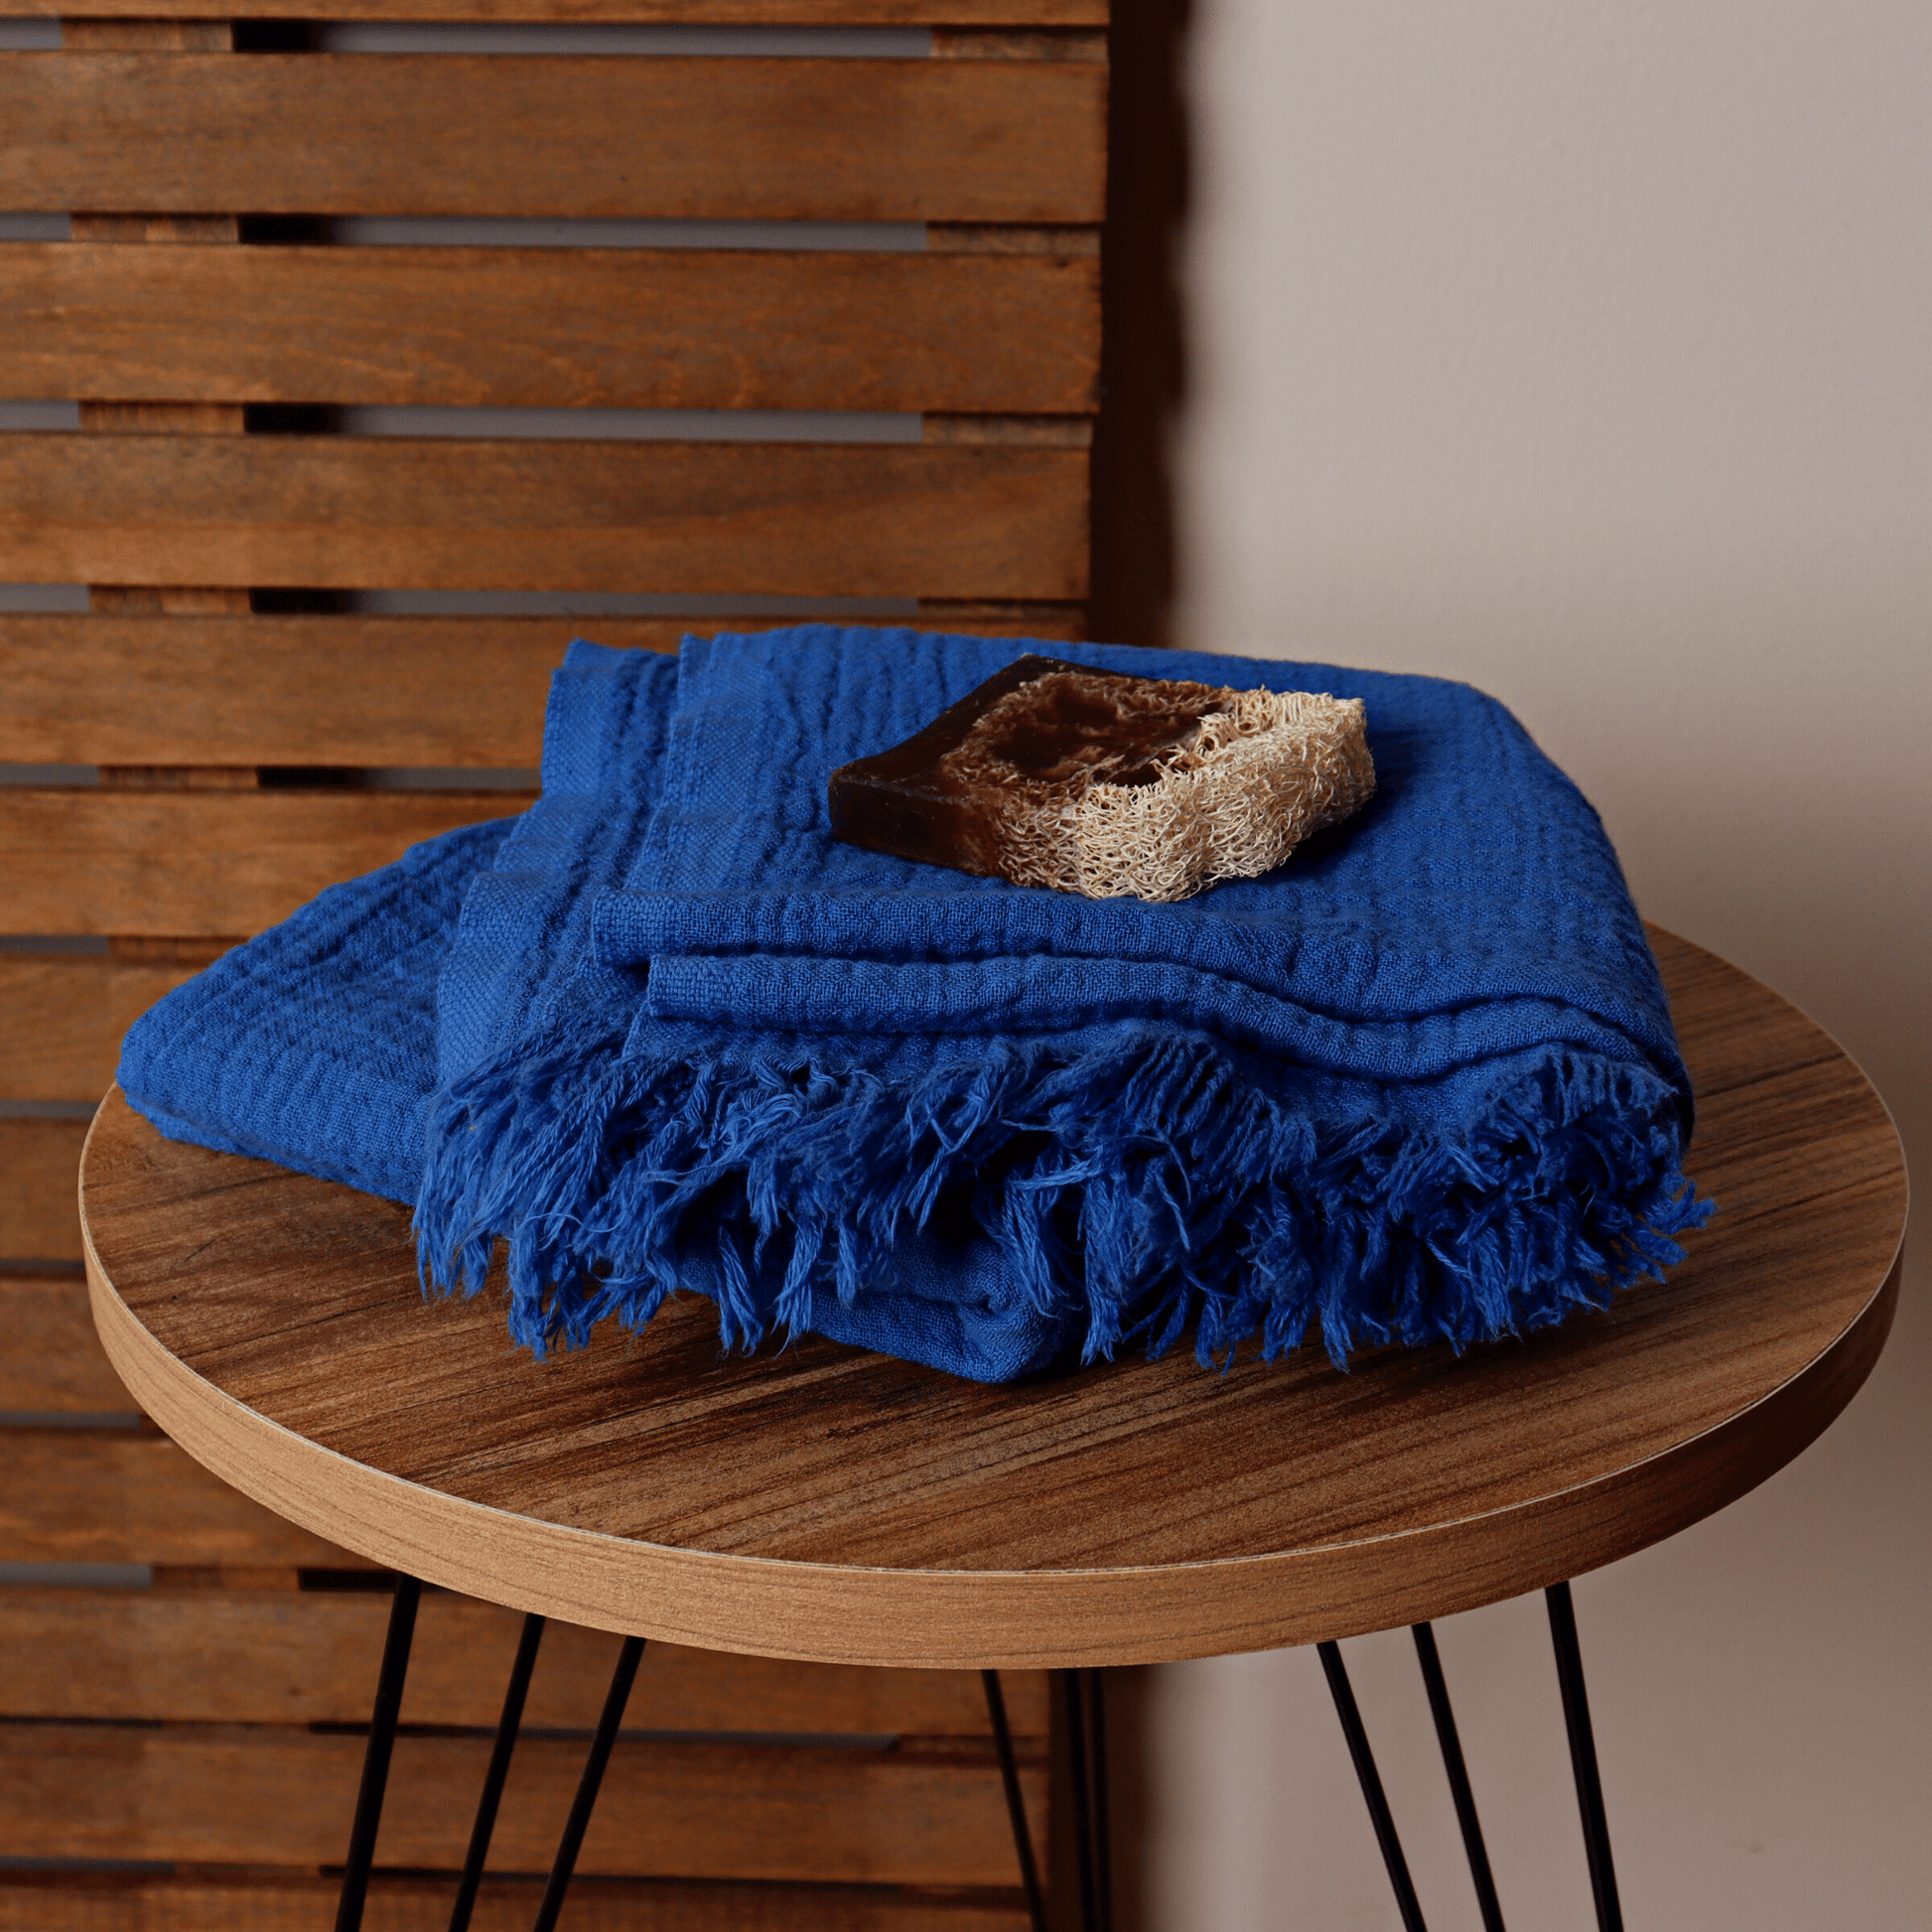 Navy Blue Muslin Towel for Adults